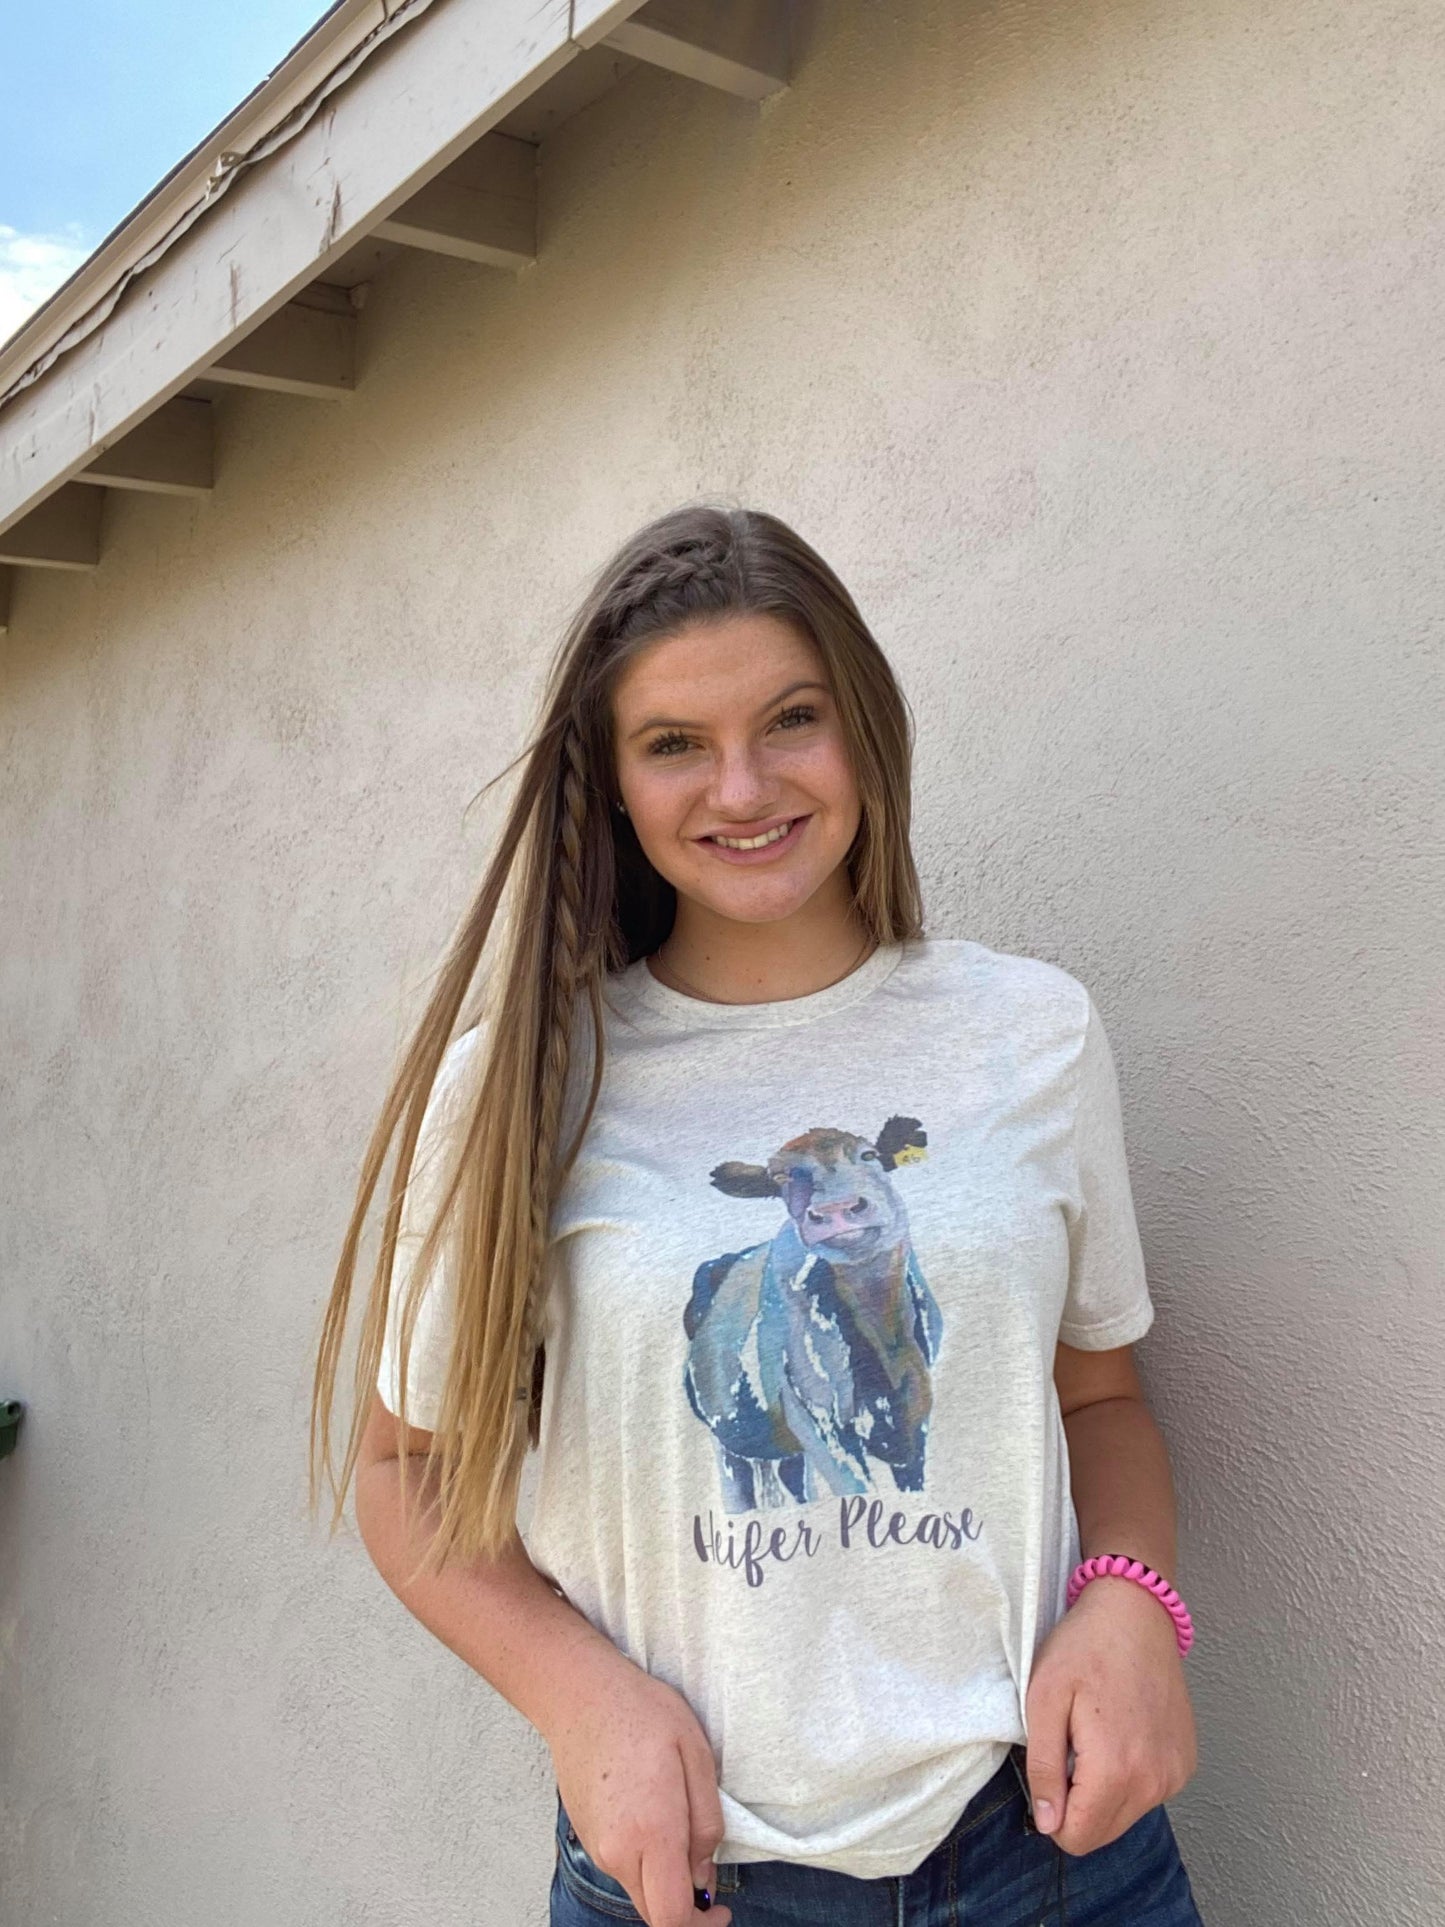 The Heifer Please Graphic Tee